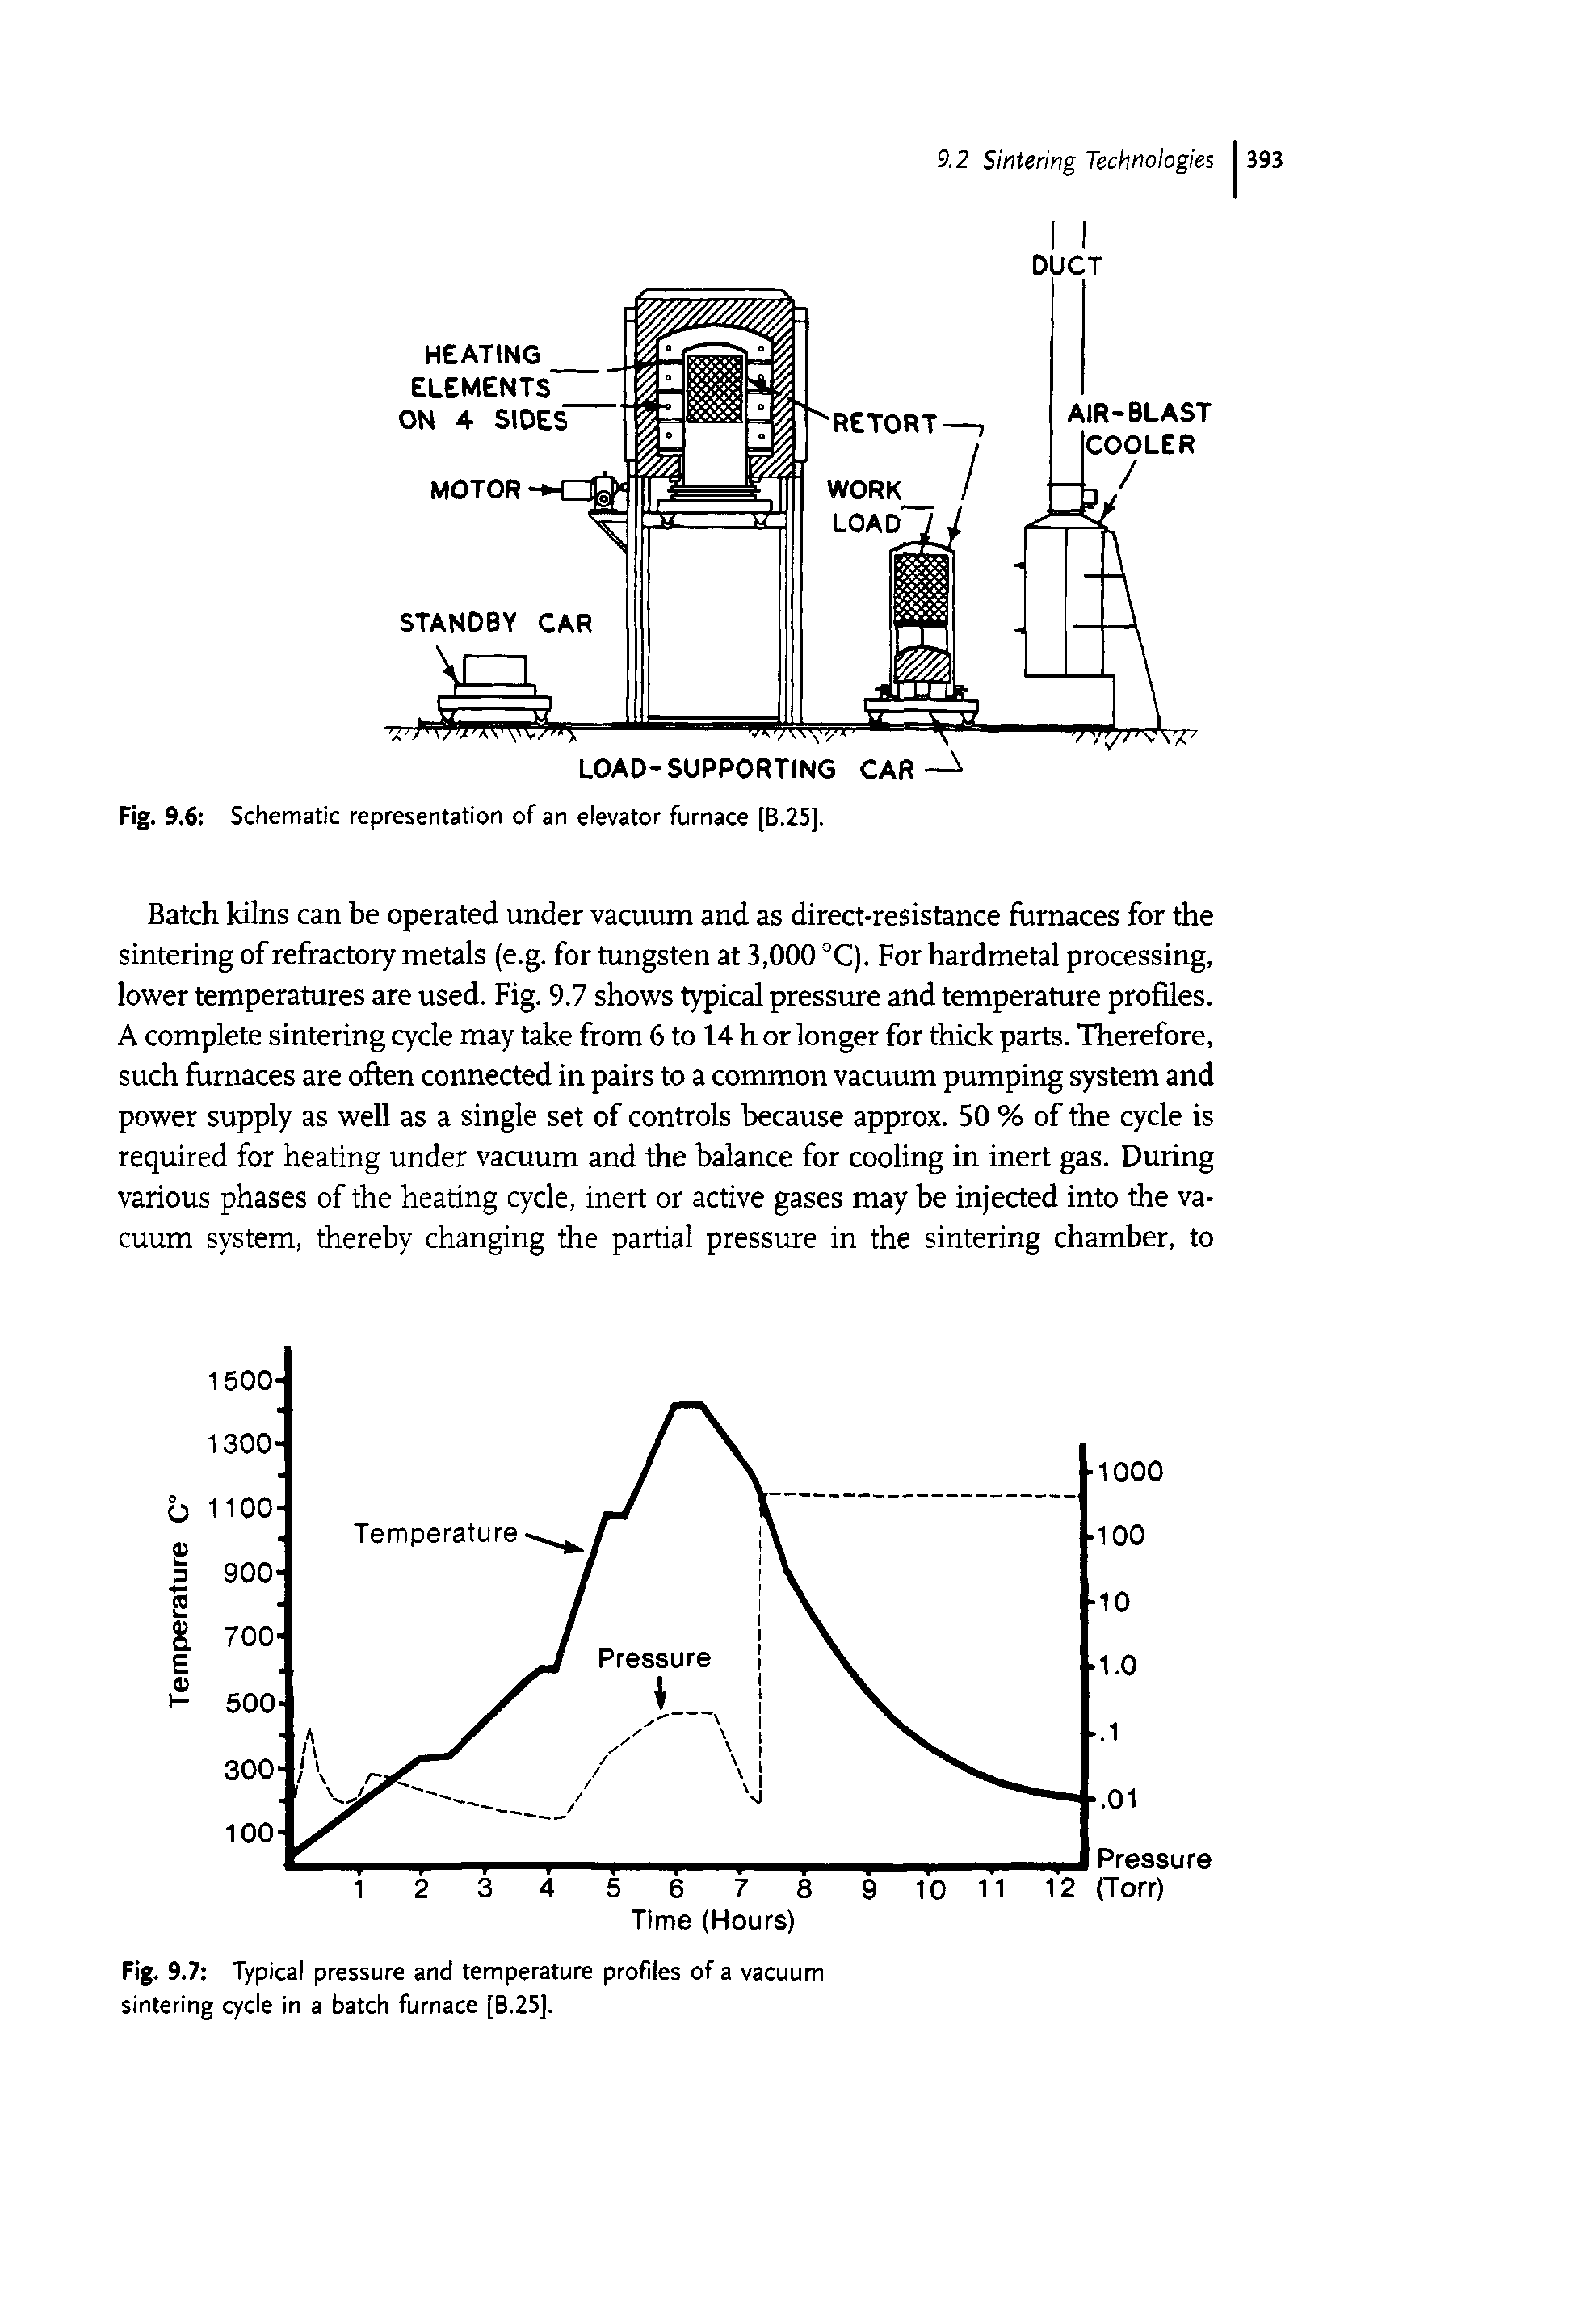 Fig. 9.7 Typical pressure and temperature profiles of a vacuum sintering cycle in a batch furnace [B.25].